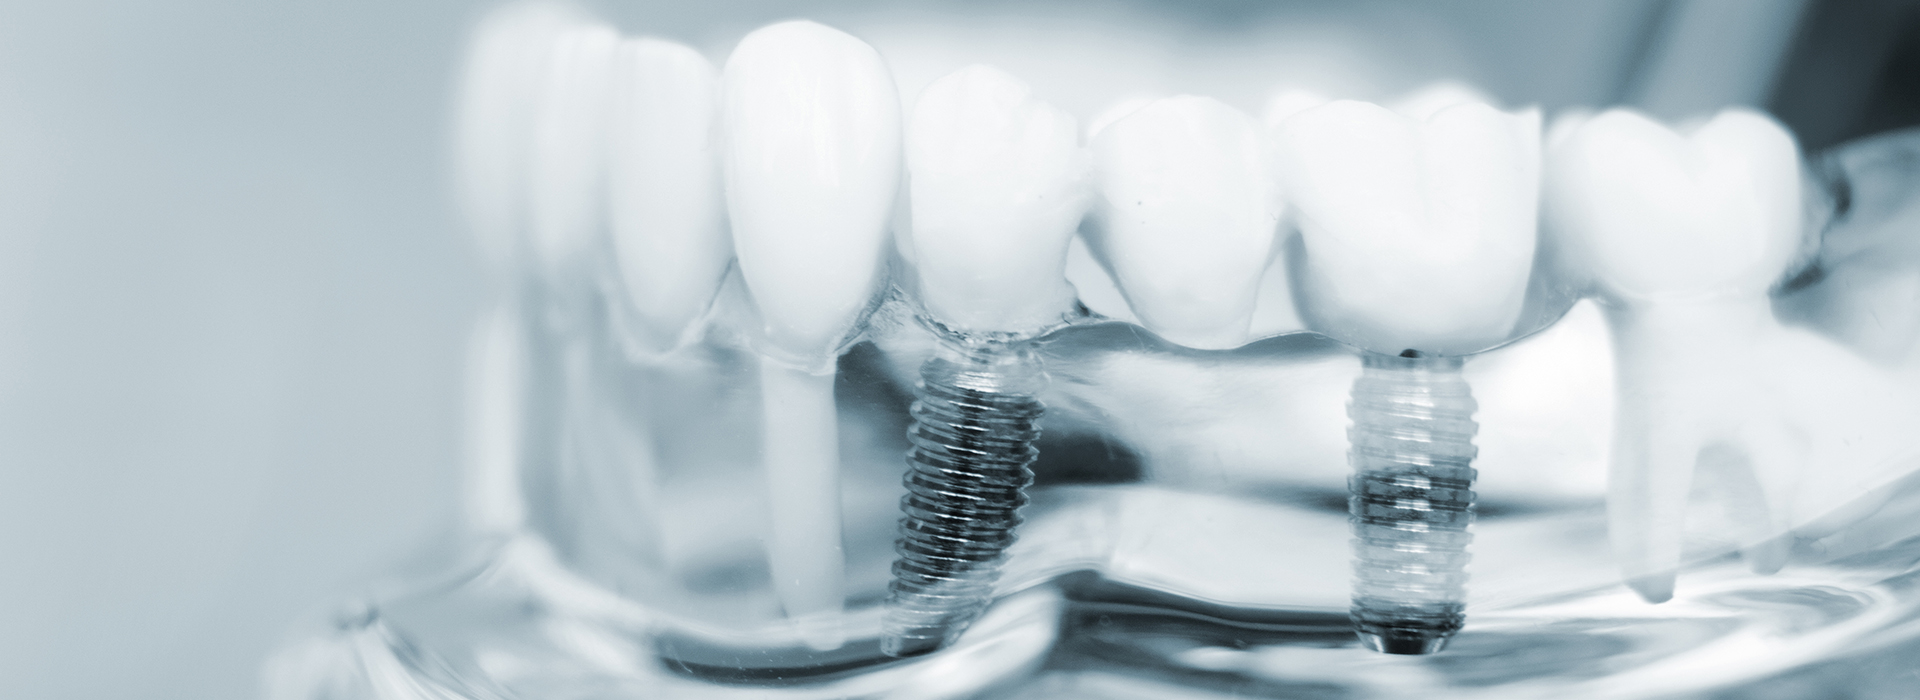 Close-up of a transparent dental implant with screws and abutments, set against a blurred background.